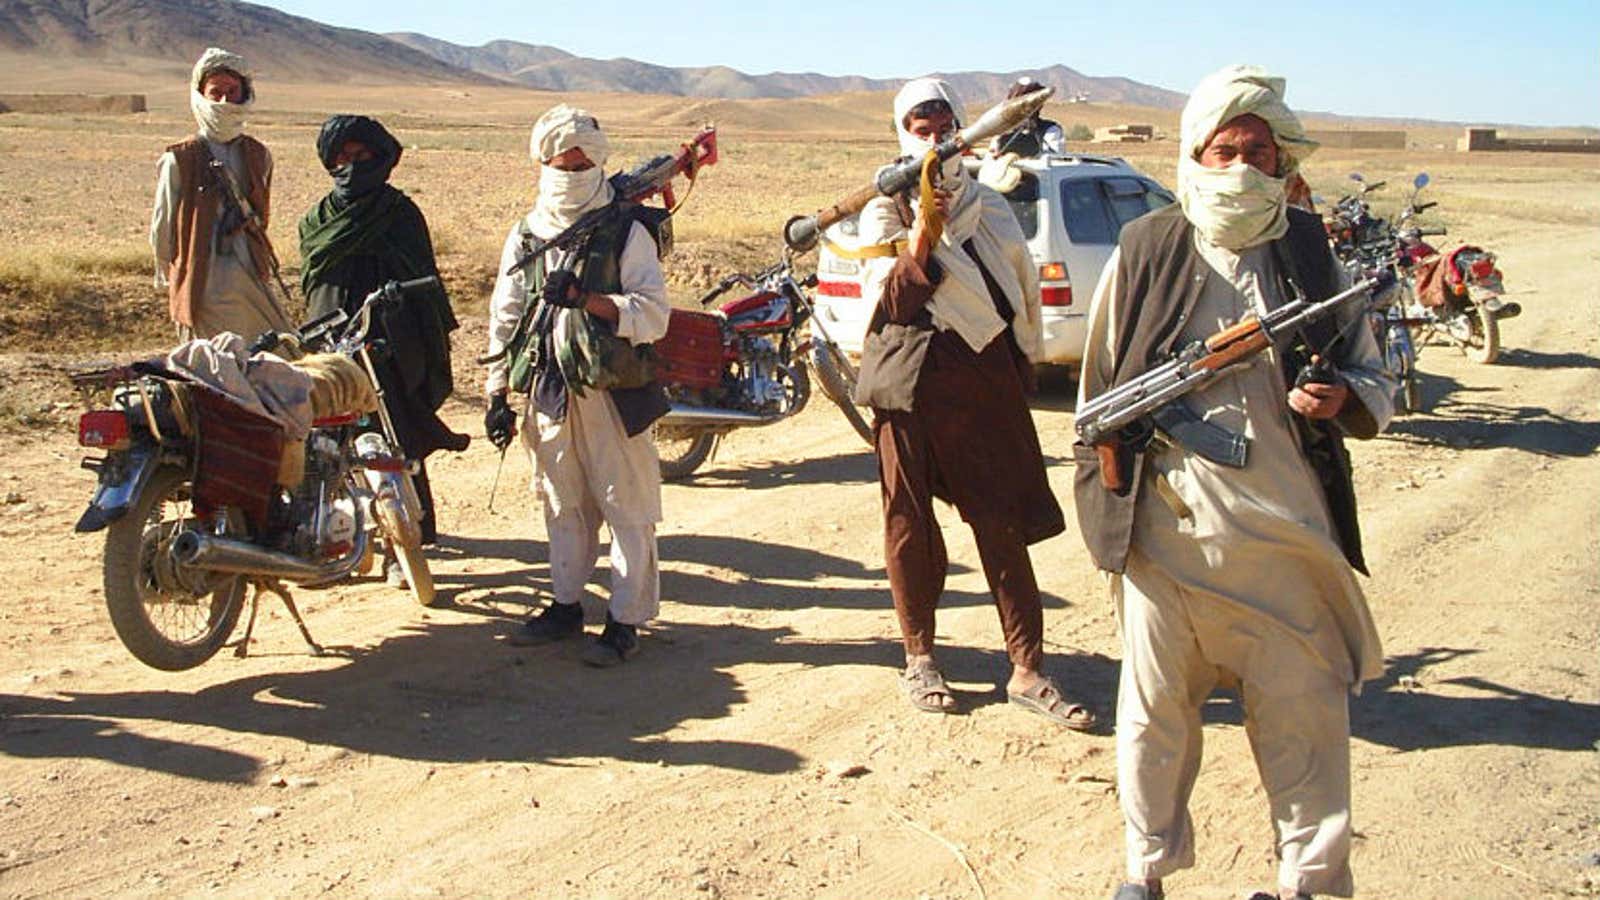 Taliban fighters pose with weapons in Afghanistan.